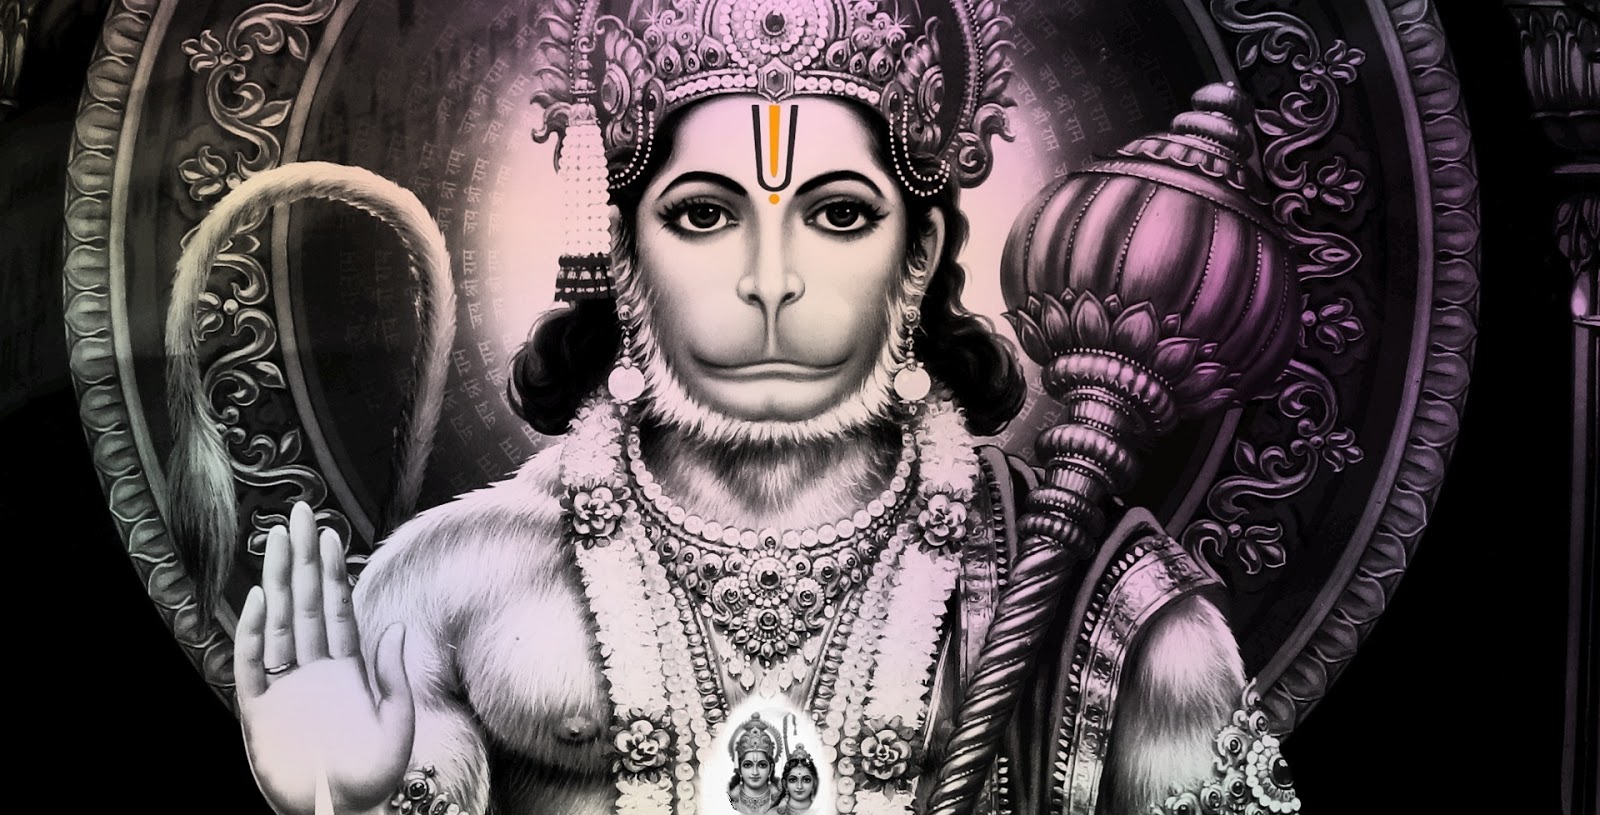 Hanuman Images, Photos, Pictures and wallpapers 2016 | Lord Hanuman